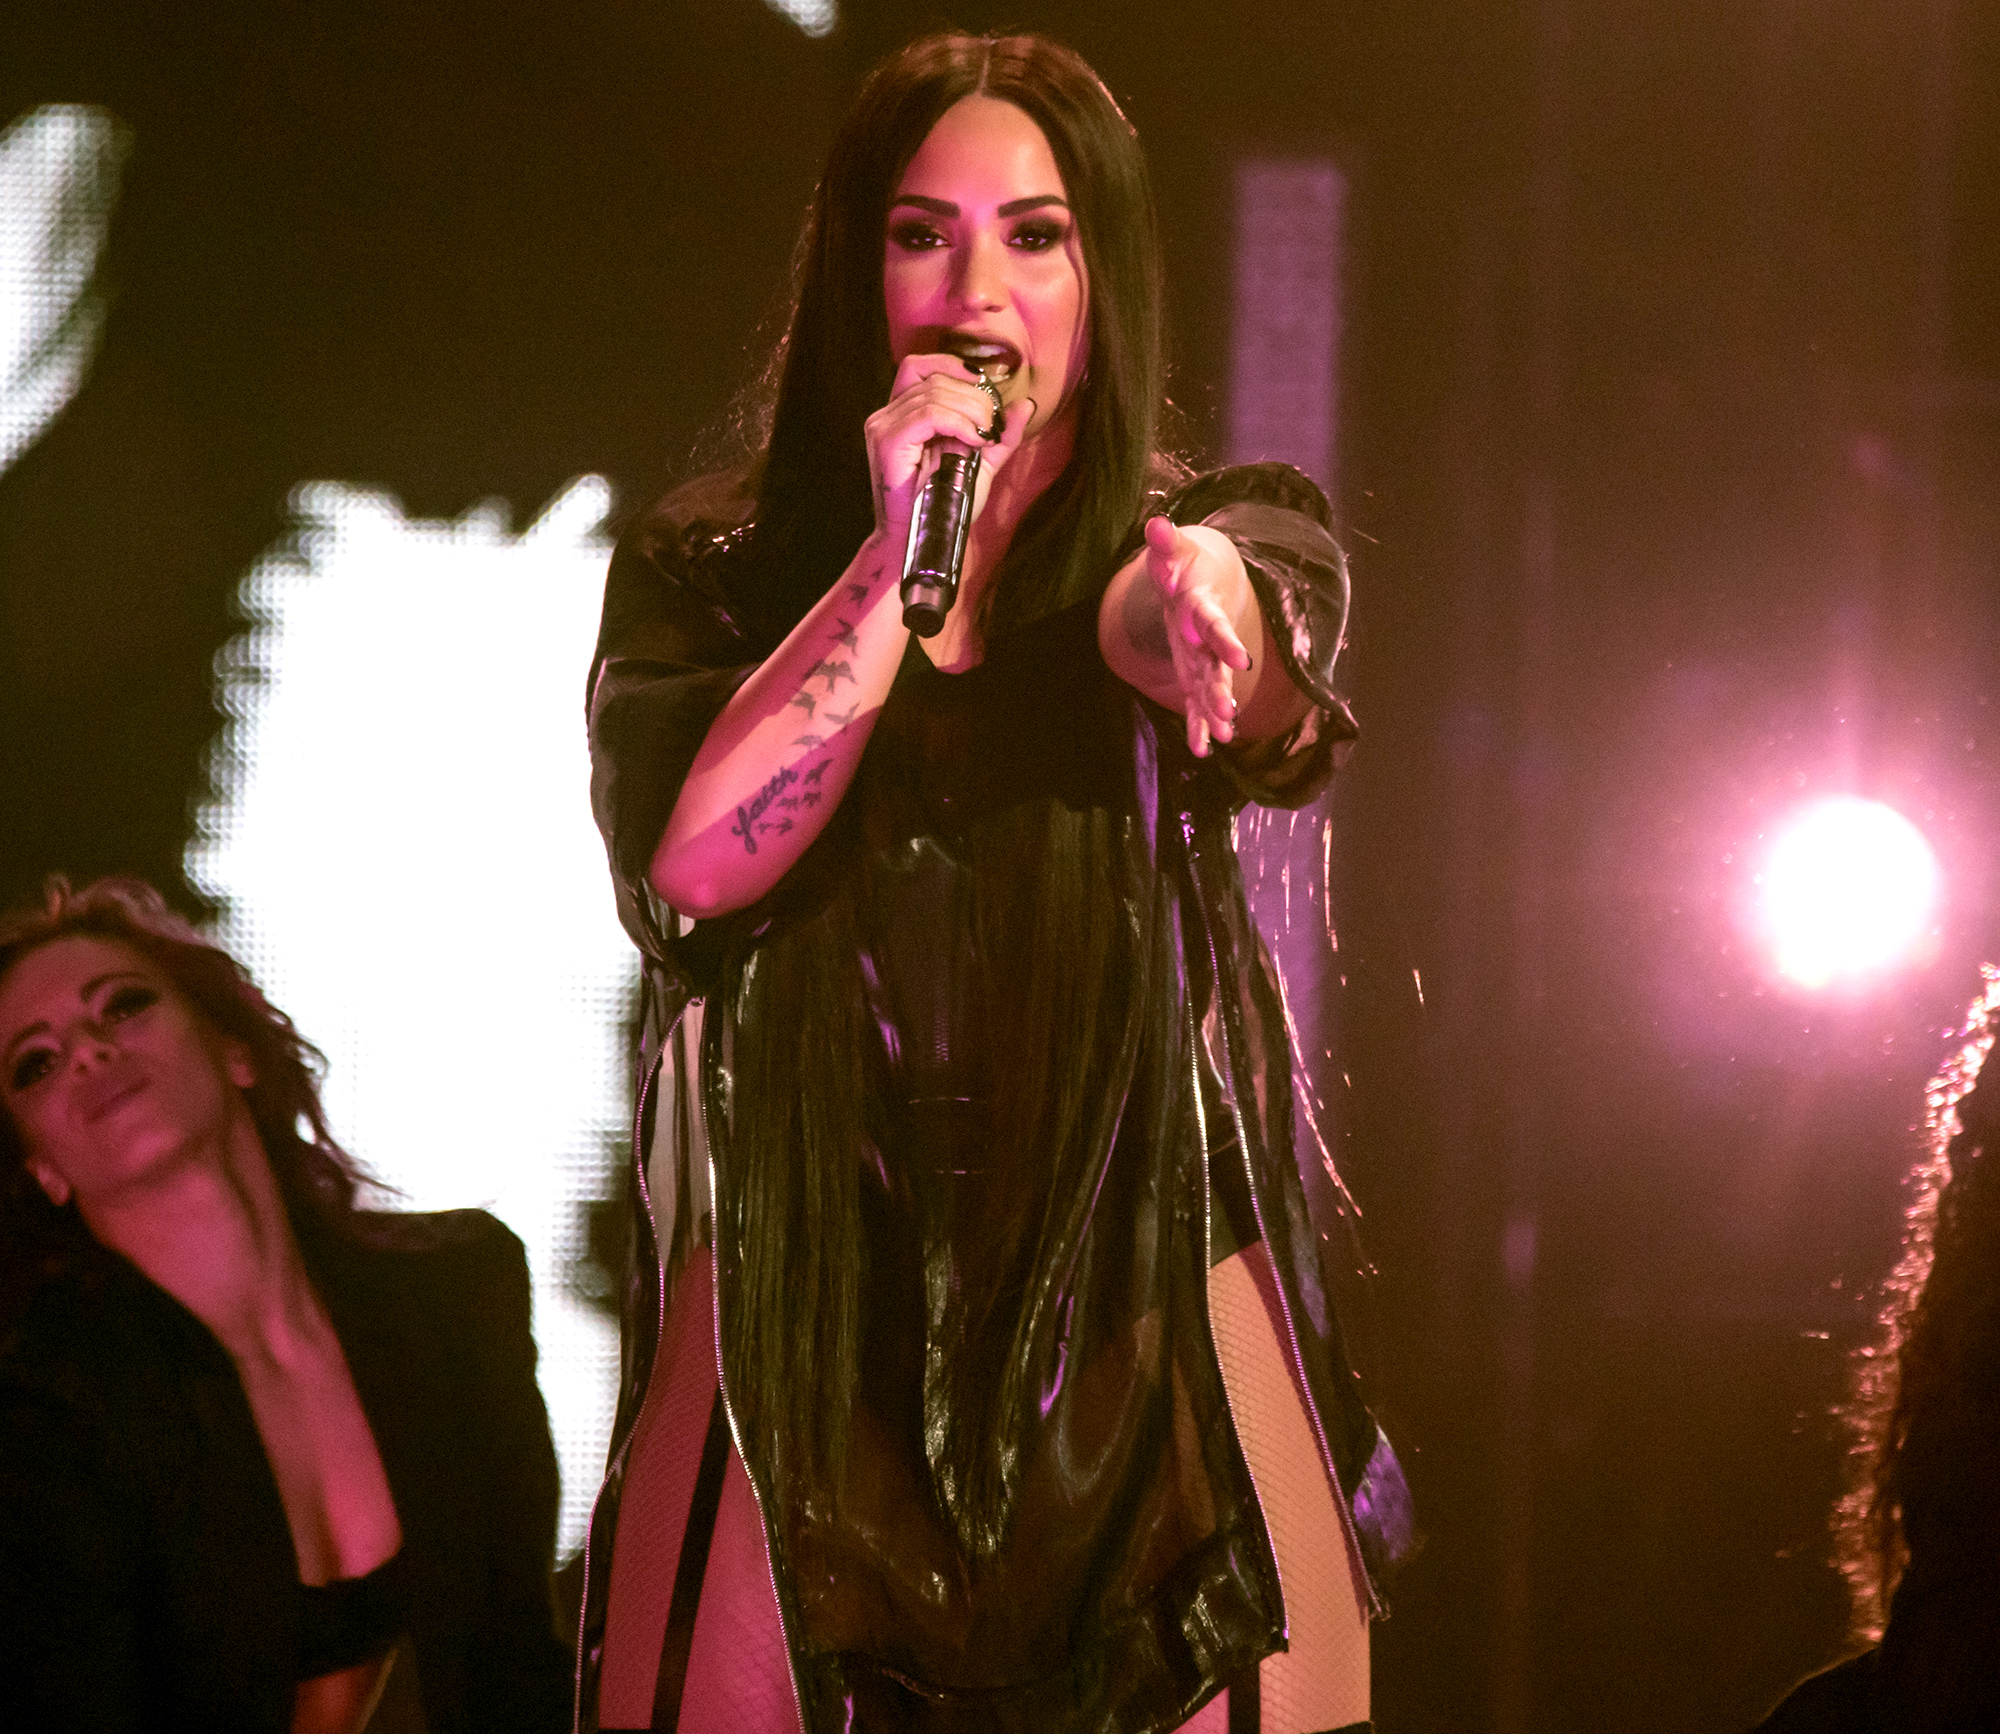 Demi Lovato Performs At Billboard Music Awards 2020 After Max Ehrich Split